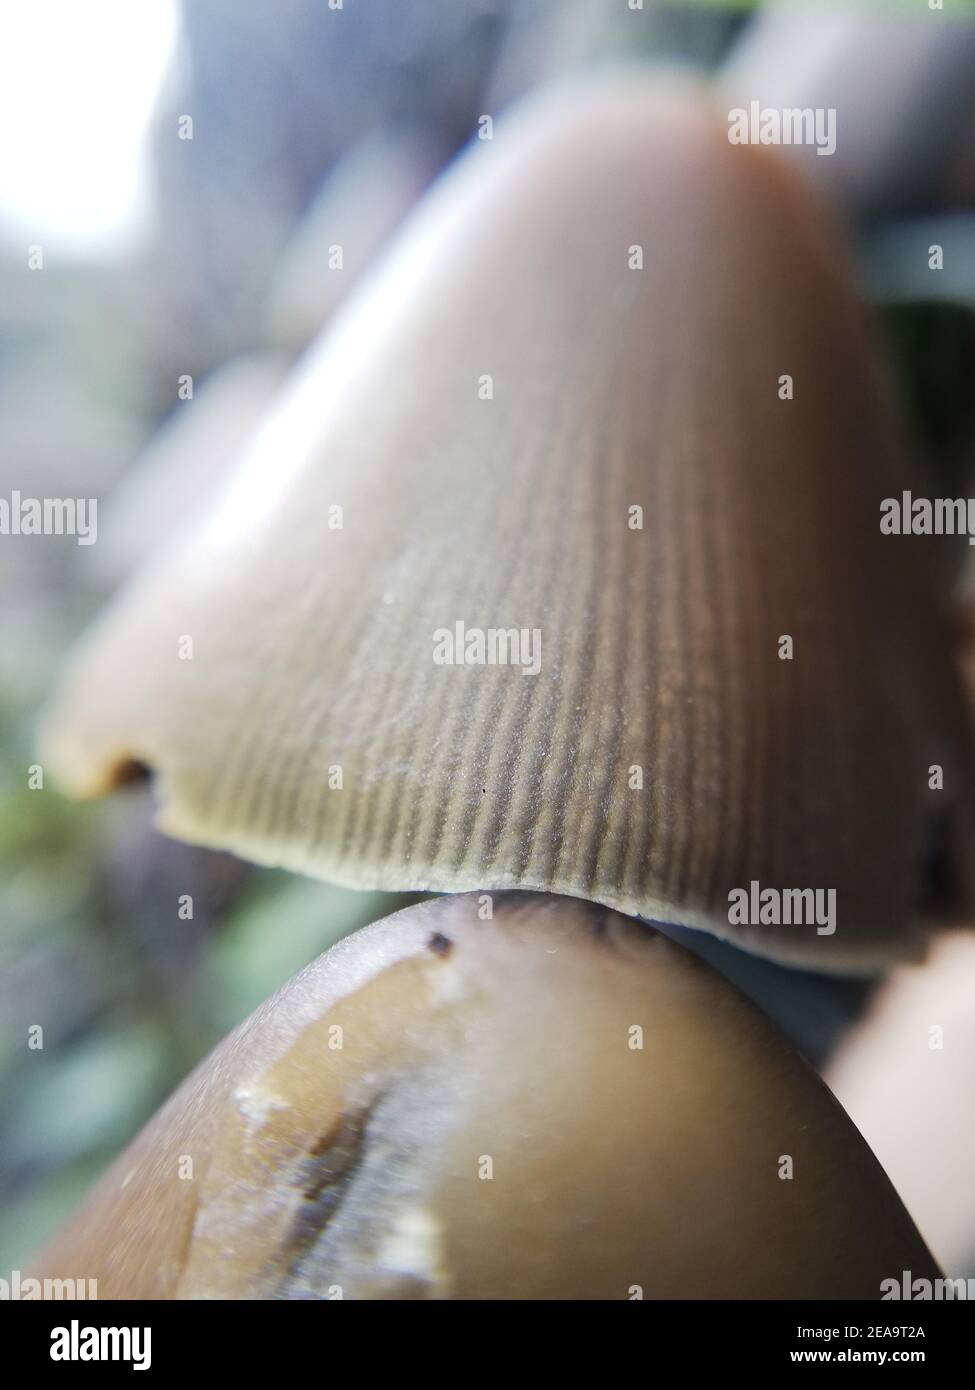 Pinecone mushroom. Close-up of nature in the forest, mushrooms Stock Photo